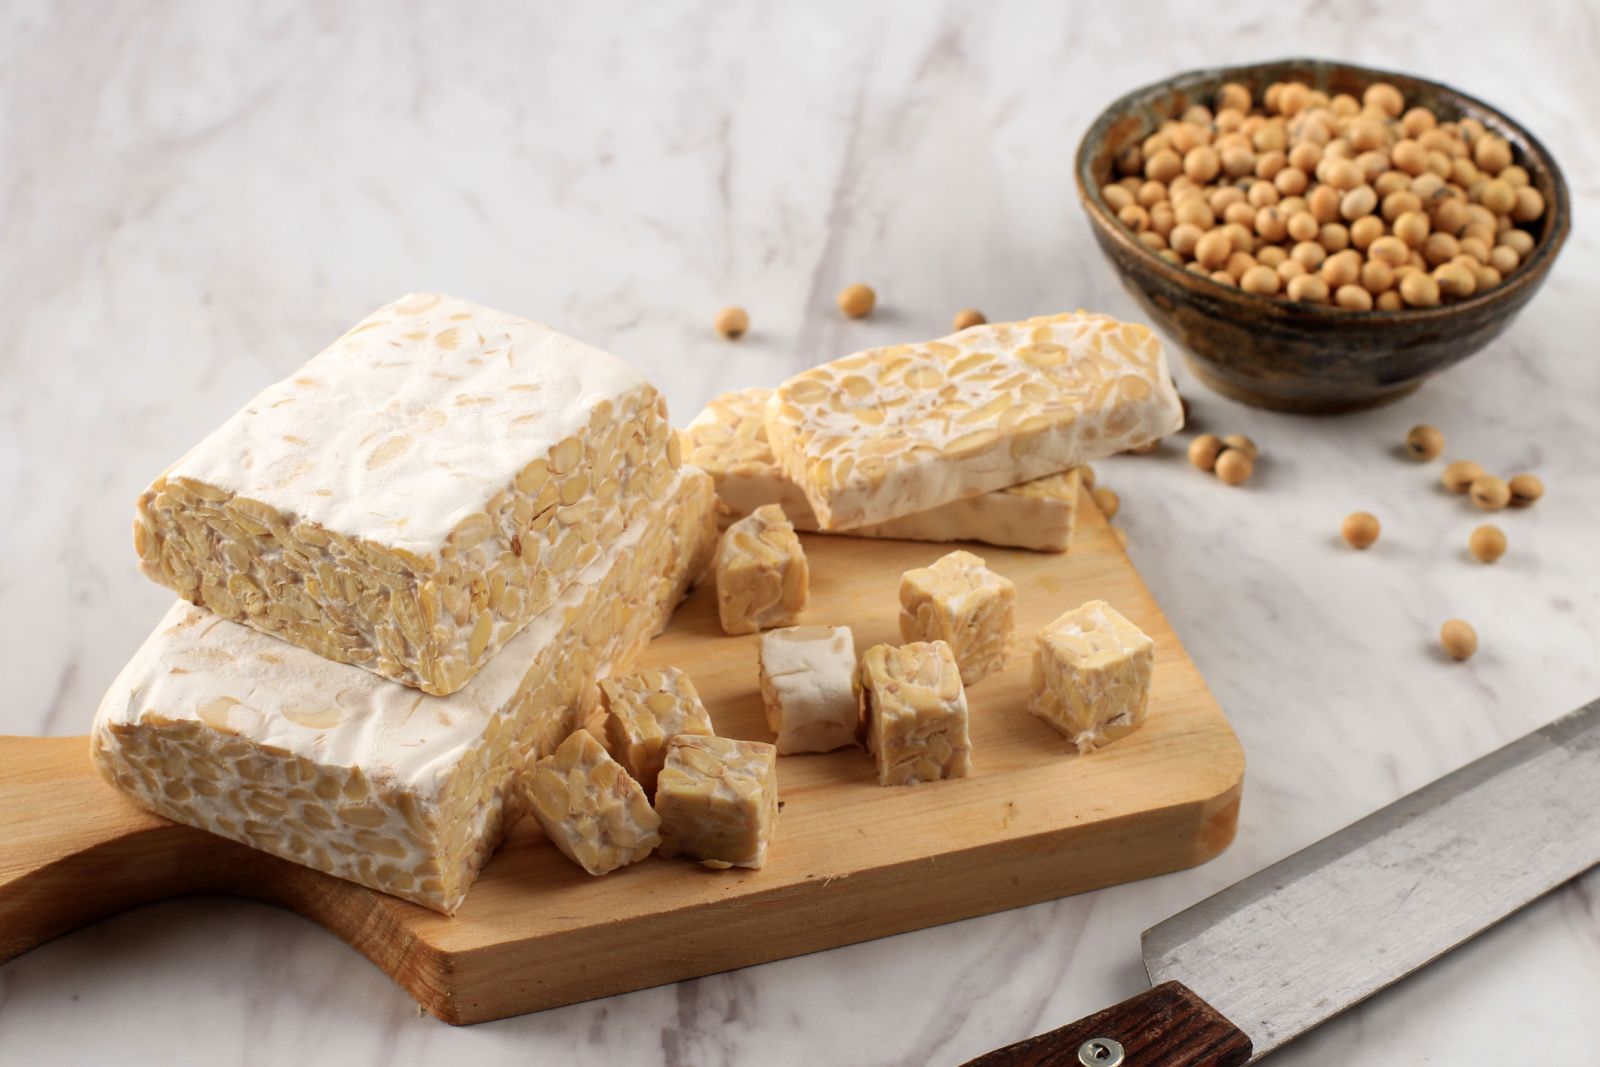 Tempeh is a plant-based protein made from fermented soybeans